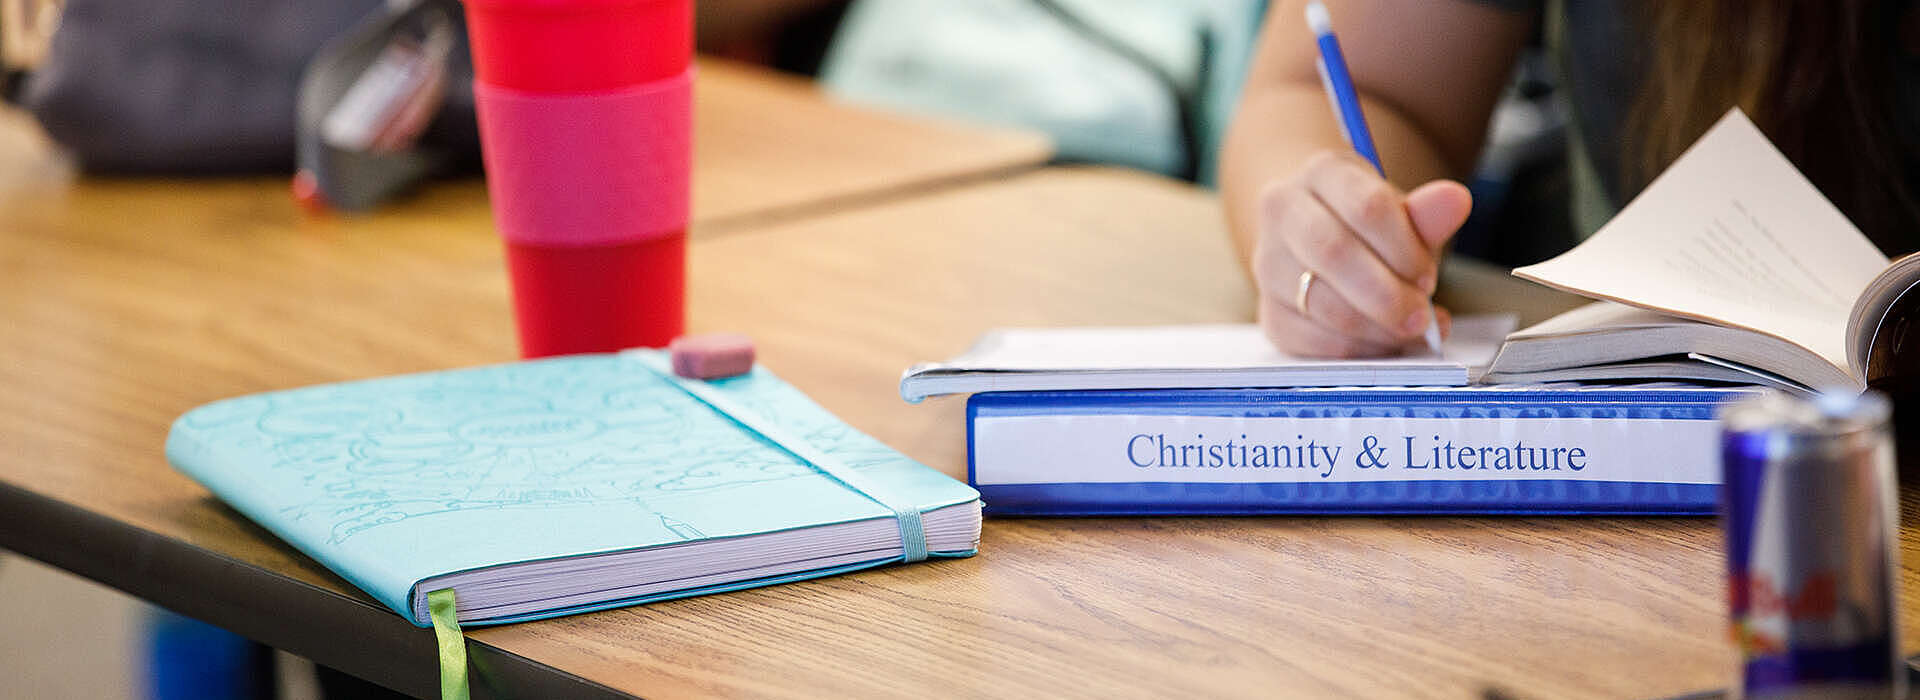 desk with cup and notebooks, one labeled Christianity and Literature